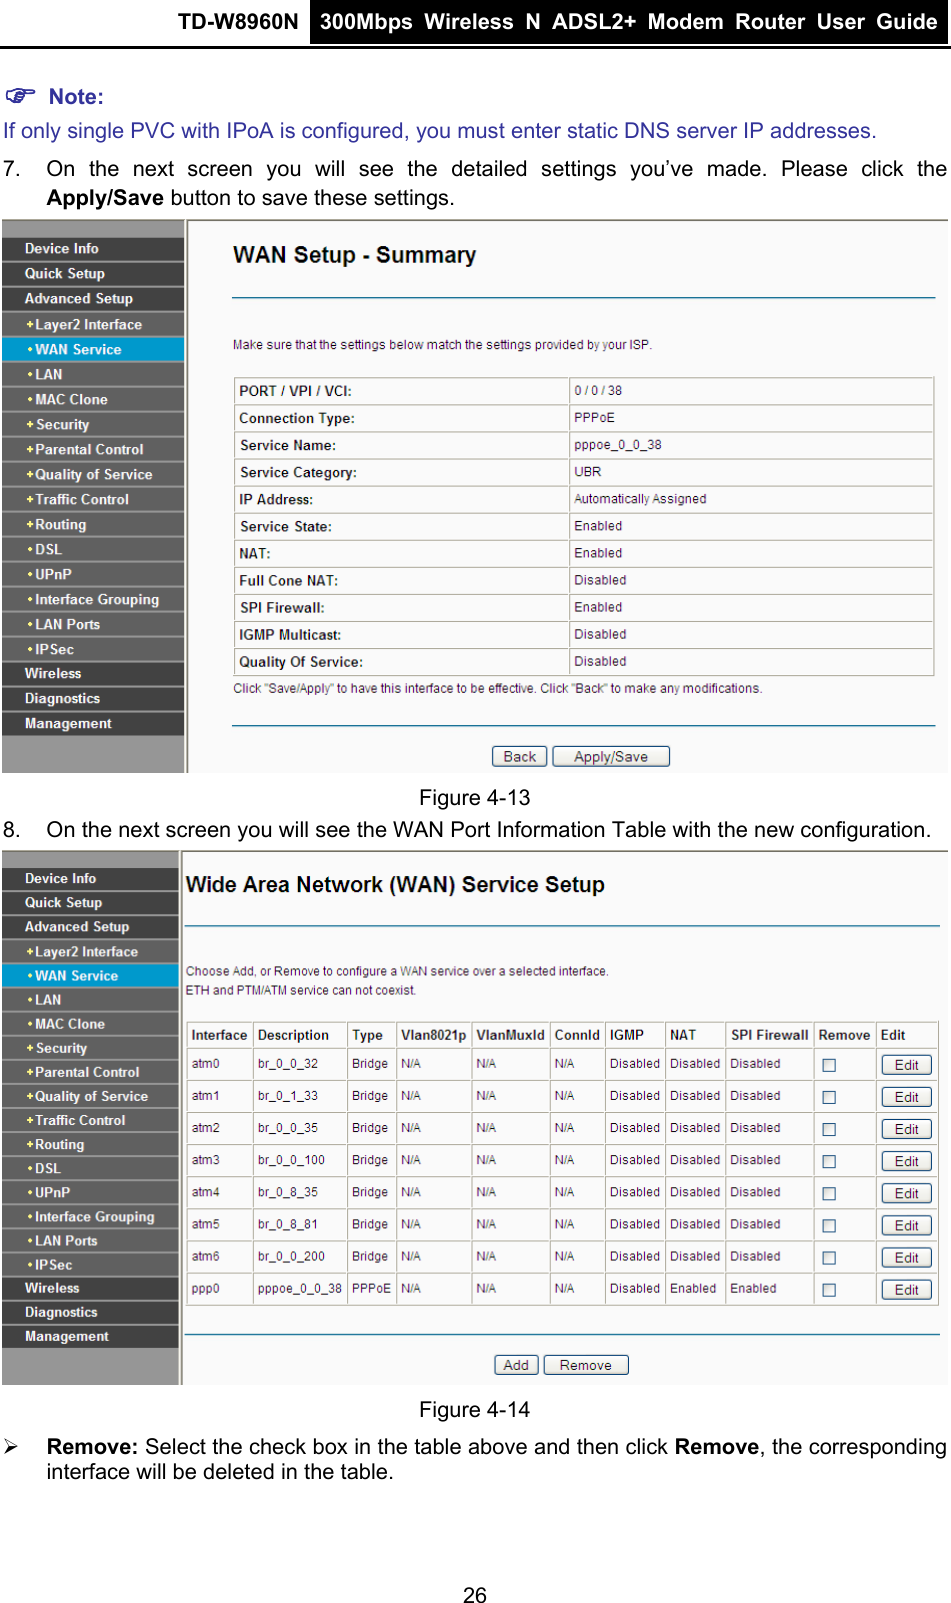 TD-W8960N  300Mbps Wireless N ADSL2+ Modem Router User Guide  ) Note: If only single PVC with IPoA is configured, you must enter static DNS server IP addresses. 7.  On the next screen you will see the detailed settings you’ve made. Please click the Apply/Save button to save these settings.  Figure 4-13 8.  On the next screen you will see the WAN Port Information Table with the new configuration.  Figure 4-14 ¾ Remove: Select the check box in the table above and then click Remove, the corresponding interface will be deleted in the table. 26 